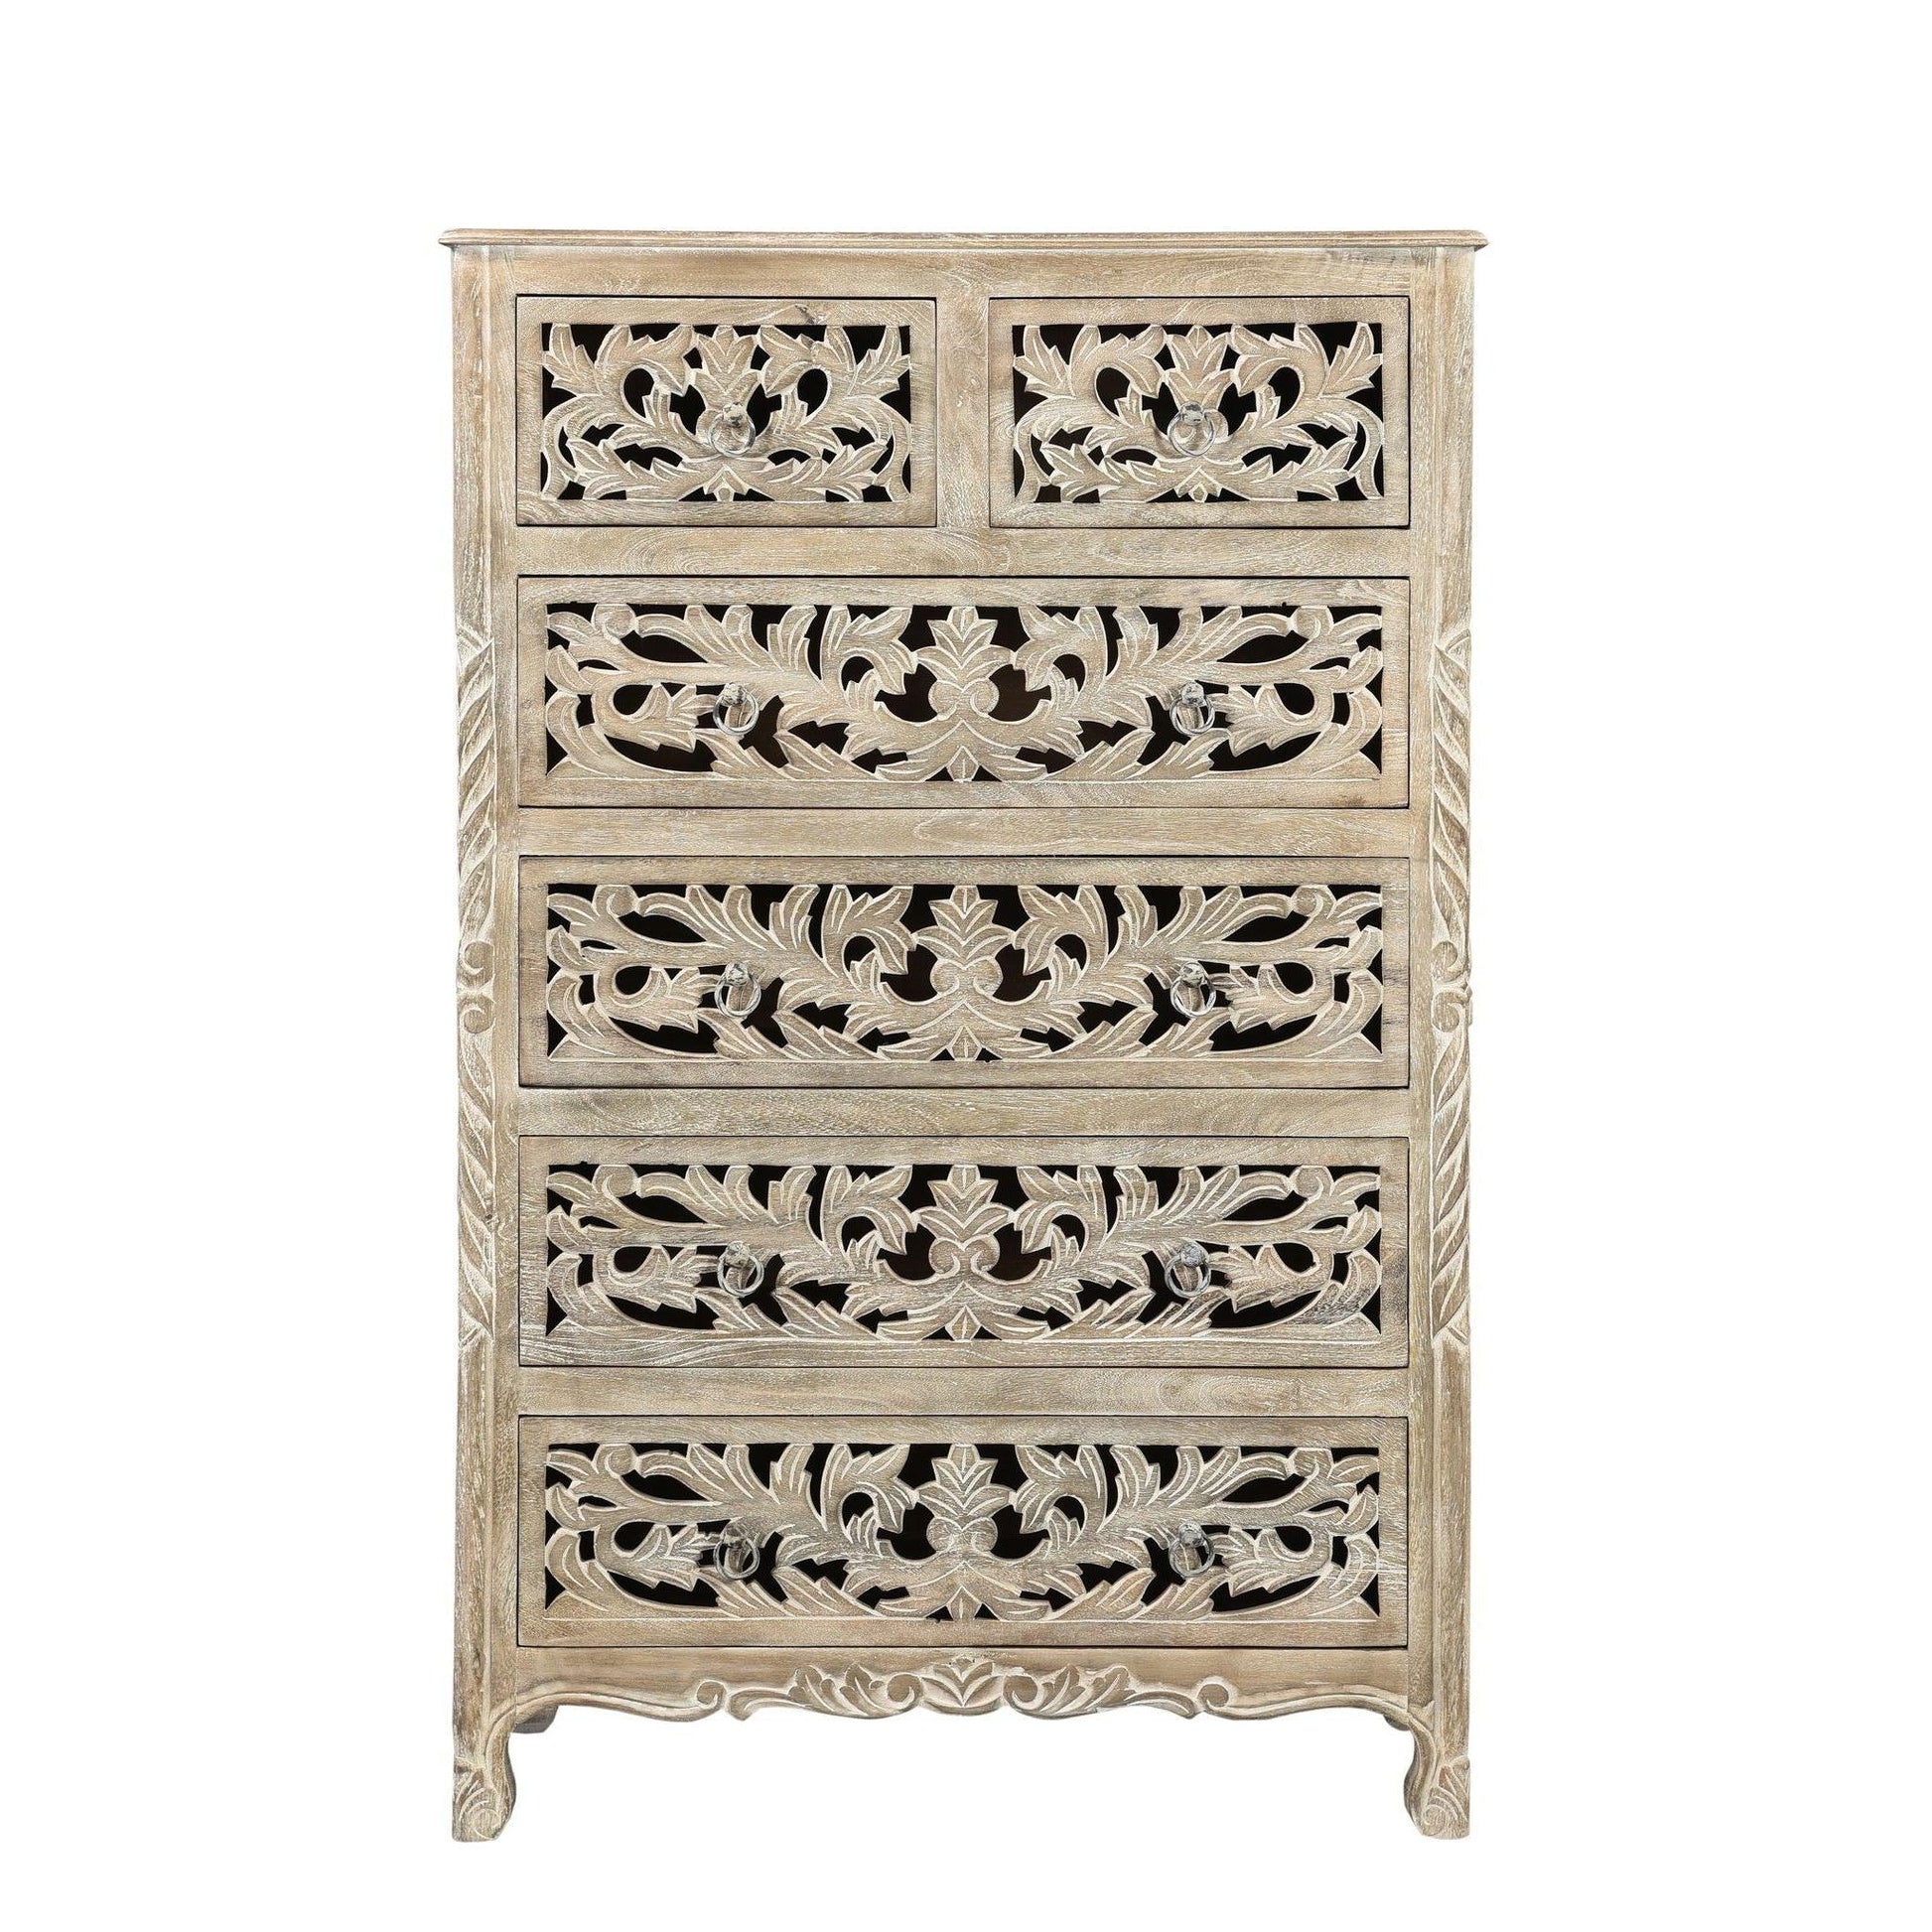 Lawrence 54 inches Tall Gray Floral Carved Chest - Sideboards and Things Brand_LOOMLAN Home, Color_Beige, Color_Gray, Features_Handmade, Features_Handmade/Handcarved, Features_Repurposed Materials, Finish_Distressed, Height_50-60, Hinges, Materials_Reclaimed Wood, Materials_Wood, Product Type_Chest of Drawers, Shelf Material_Wood, Width_30-40